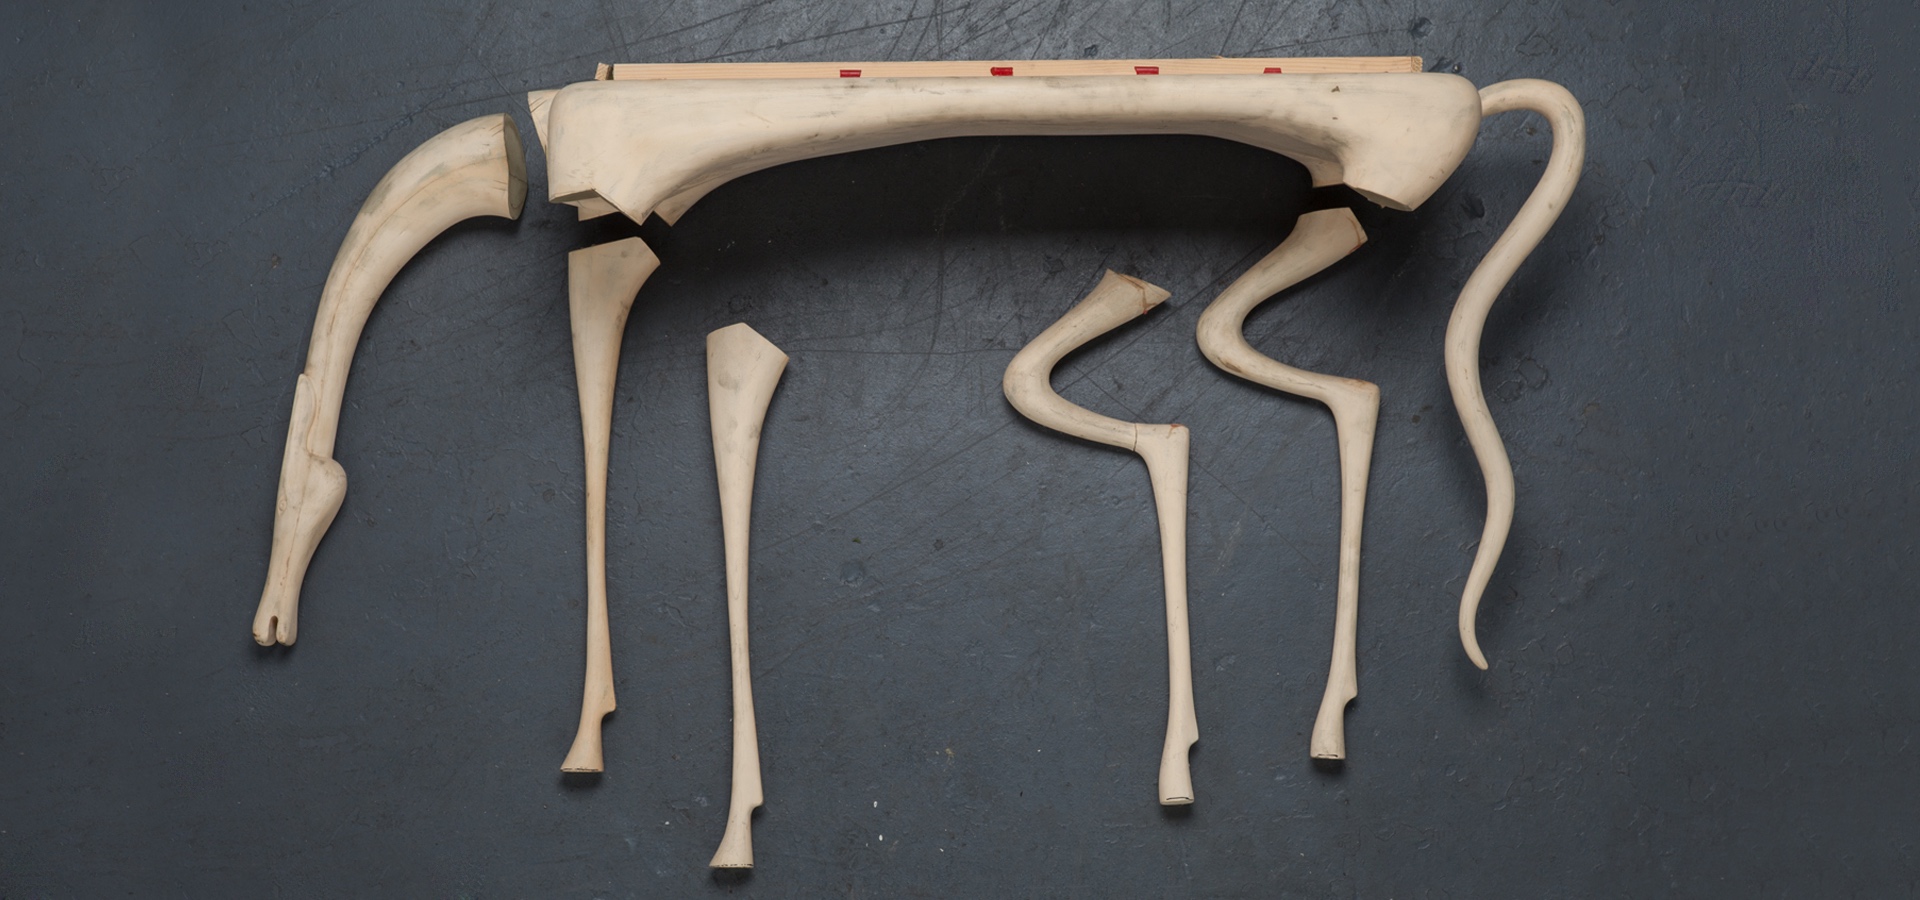 Disassembled sculpture of a long-legged animal